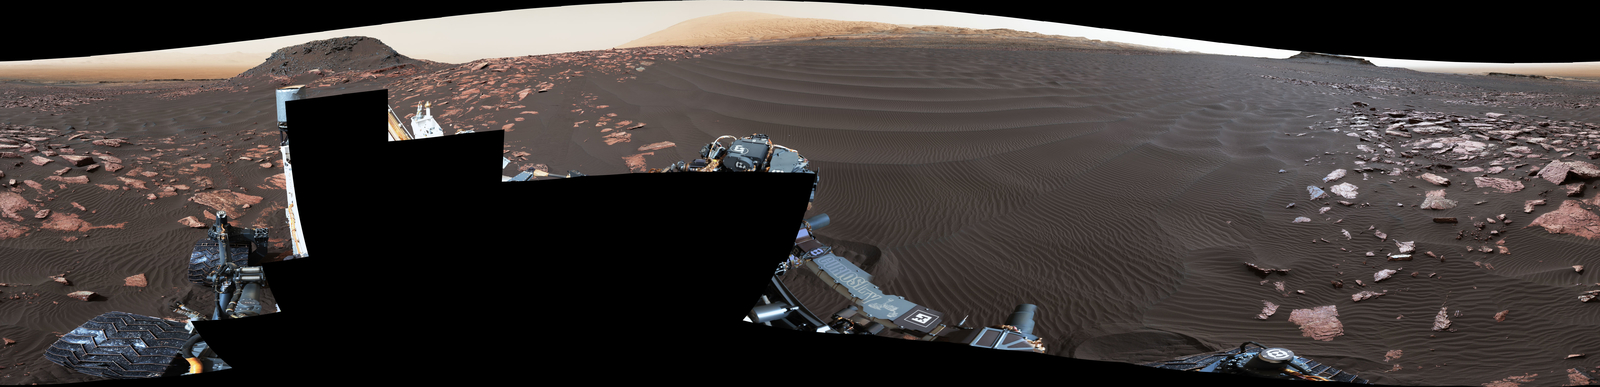 A rippled linear dune of dark Martian sand, "Nathan Bridges Dune," dominates this full-circle panorama from the Mastcam of NASA's Curiosity Mars rover. This dune was one research stop of the mission's campaign to investigate active Martian dunes. Nathan Bridges (1966-2017) helped lead that campaign